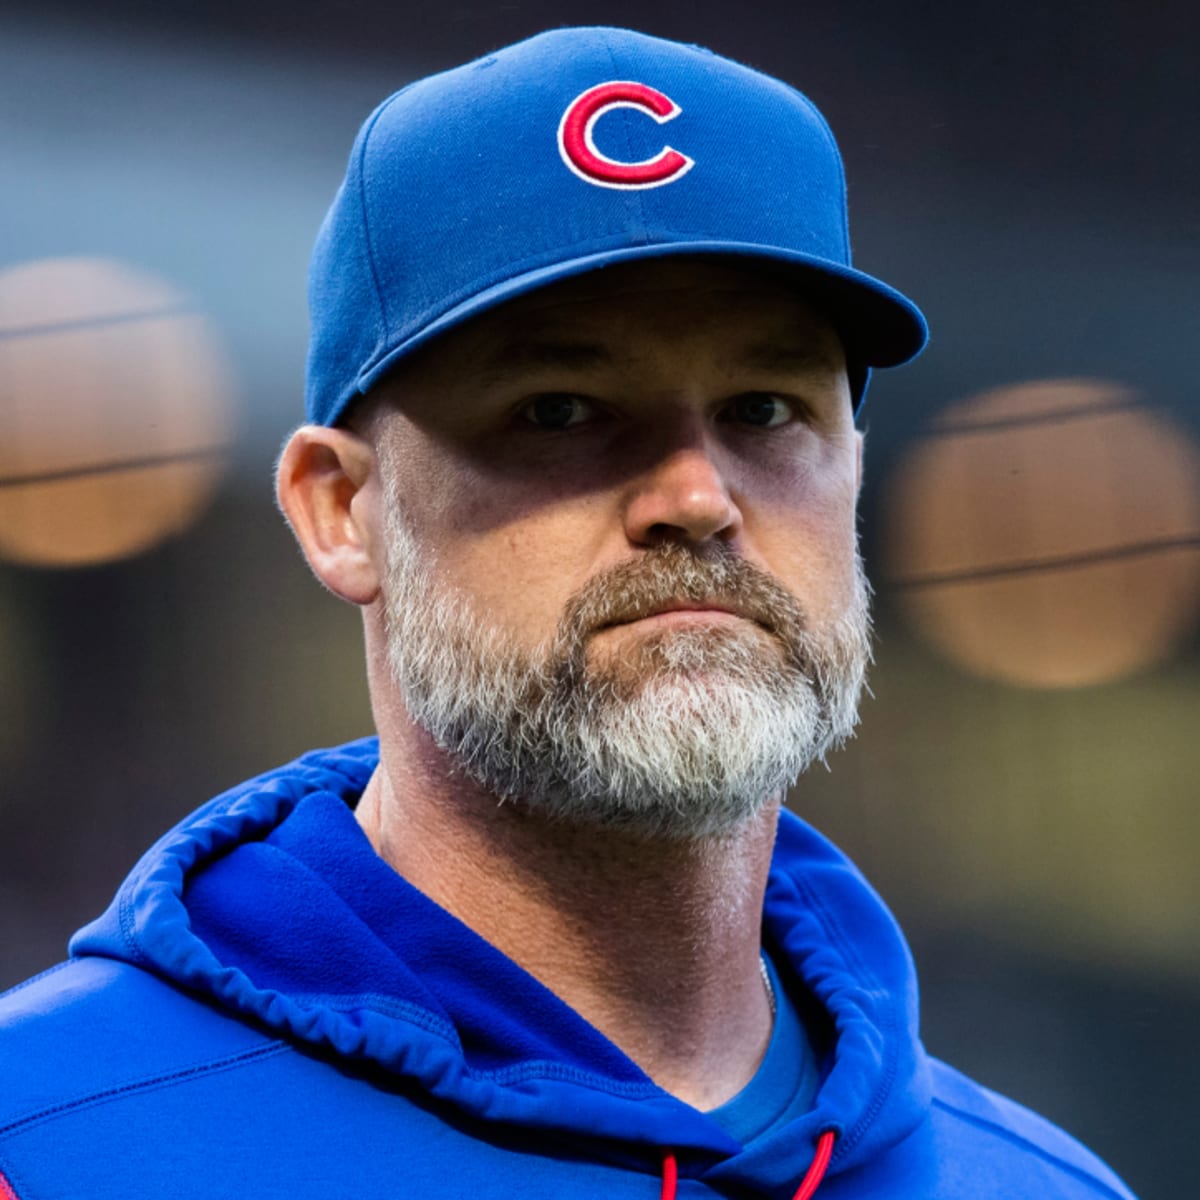 As career draws to close, Cubs' David Ross cherishing every moment